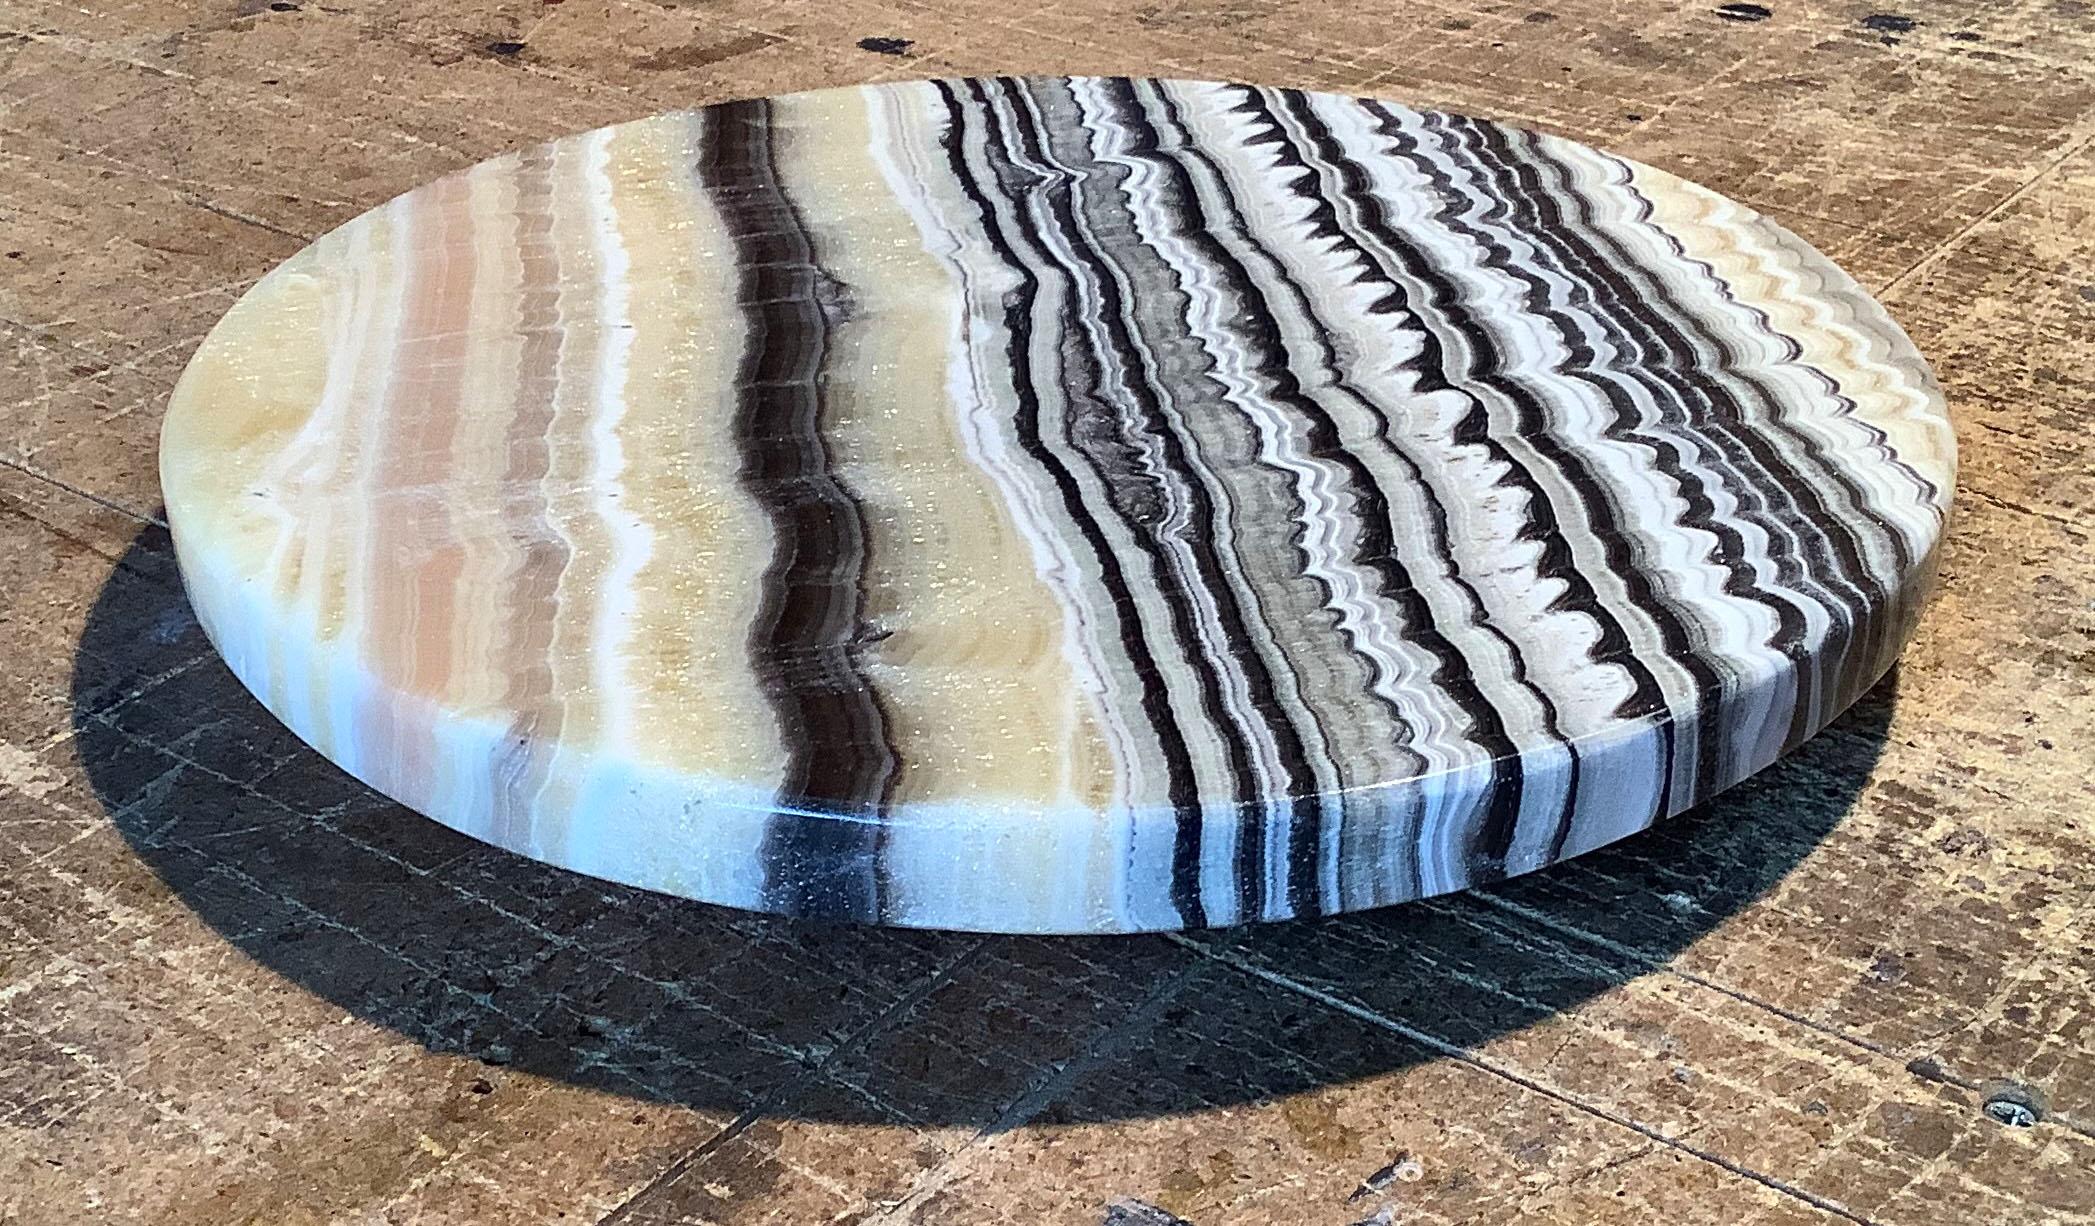 Lazy Susan carved from onyx stone with an unusual pattern of alternating black and white parallel lines.

